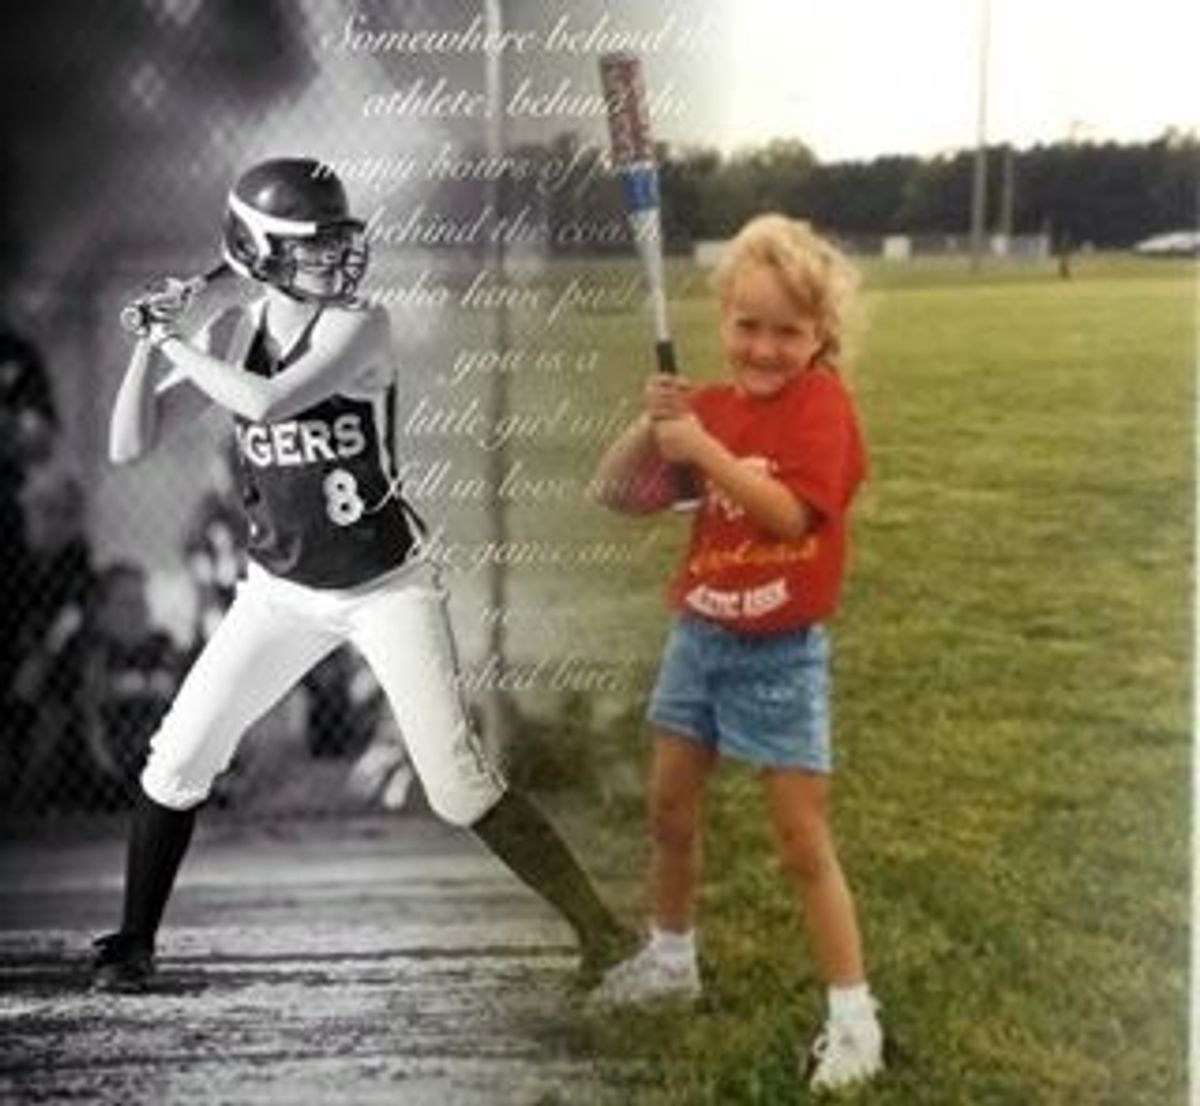 My Softball Story: For Aspiring Young Pitchers